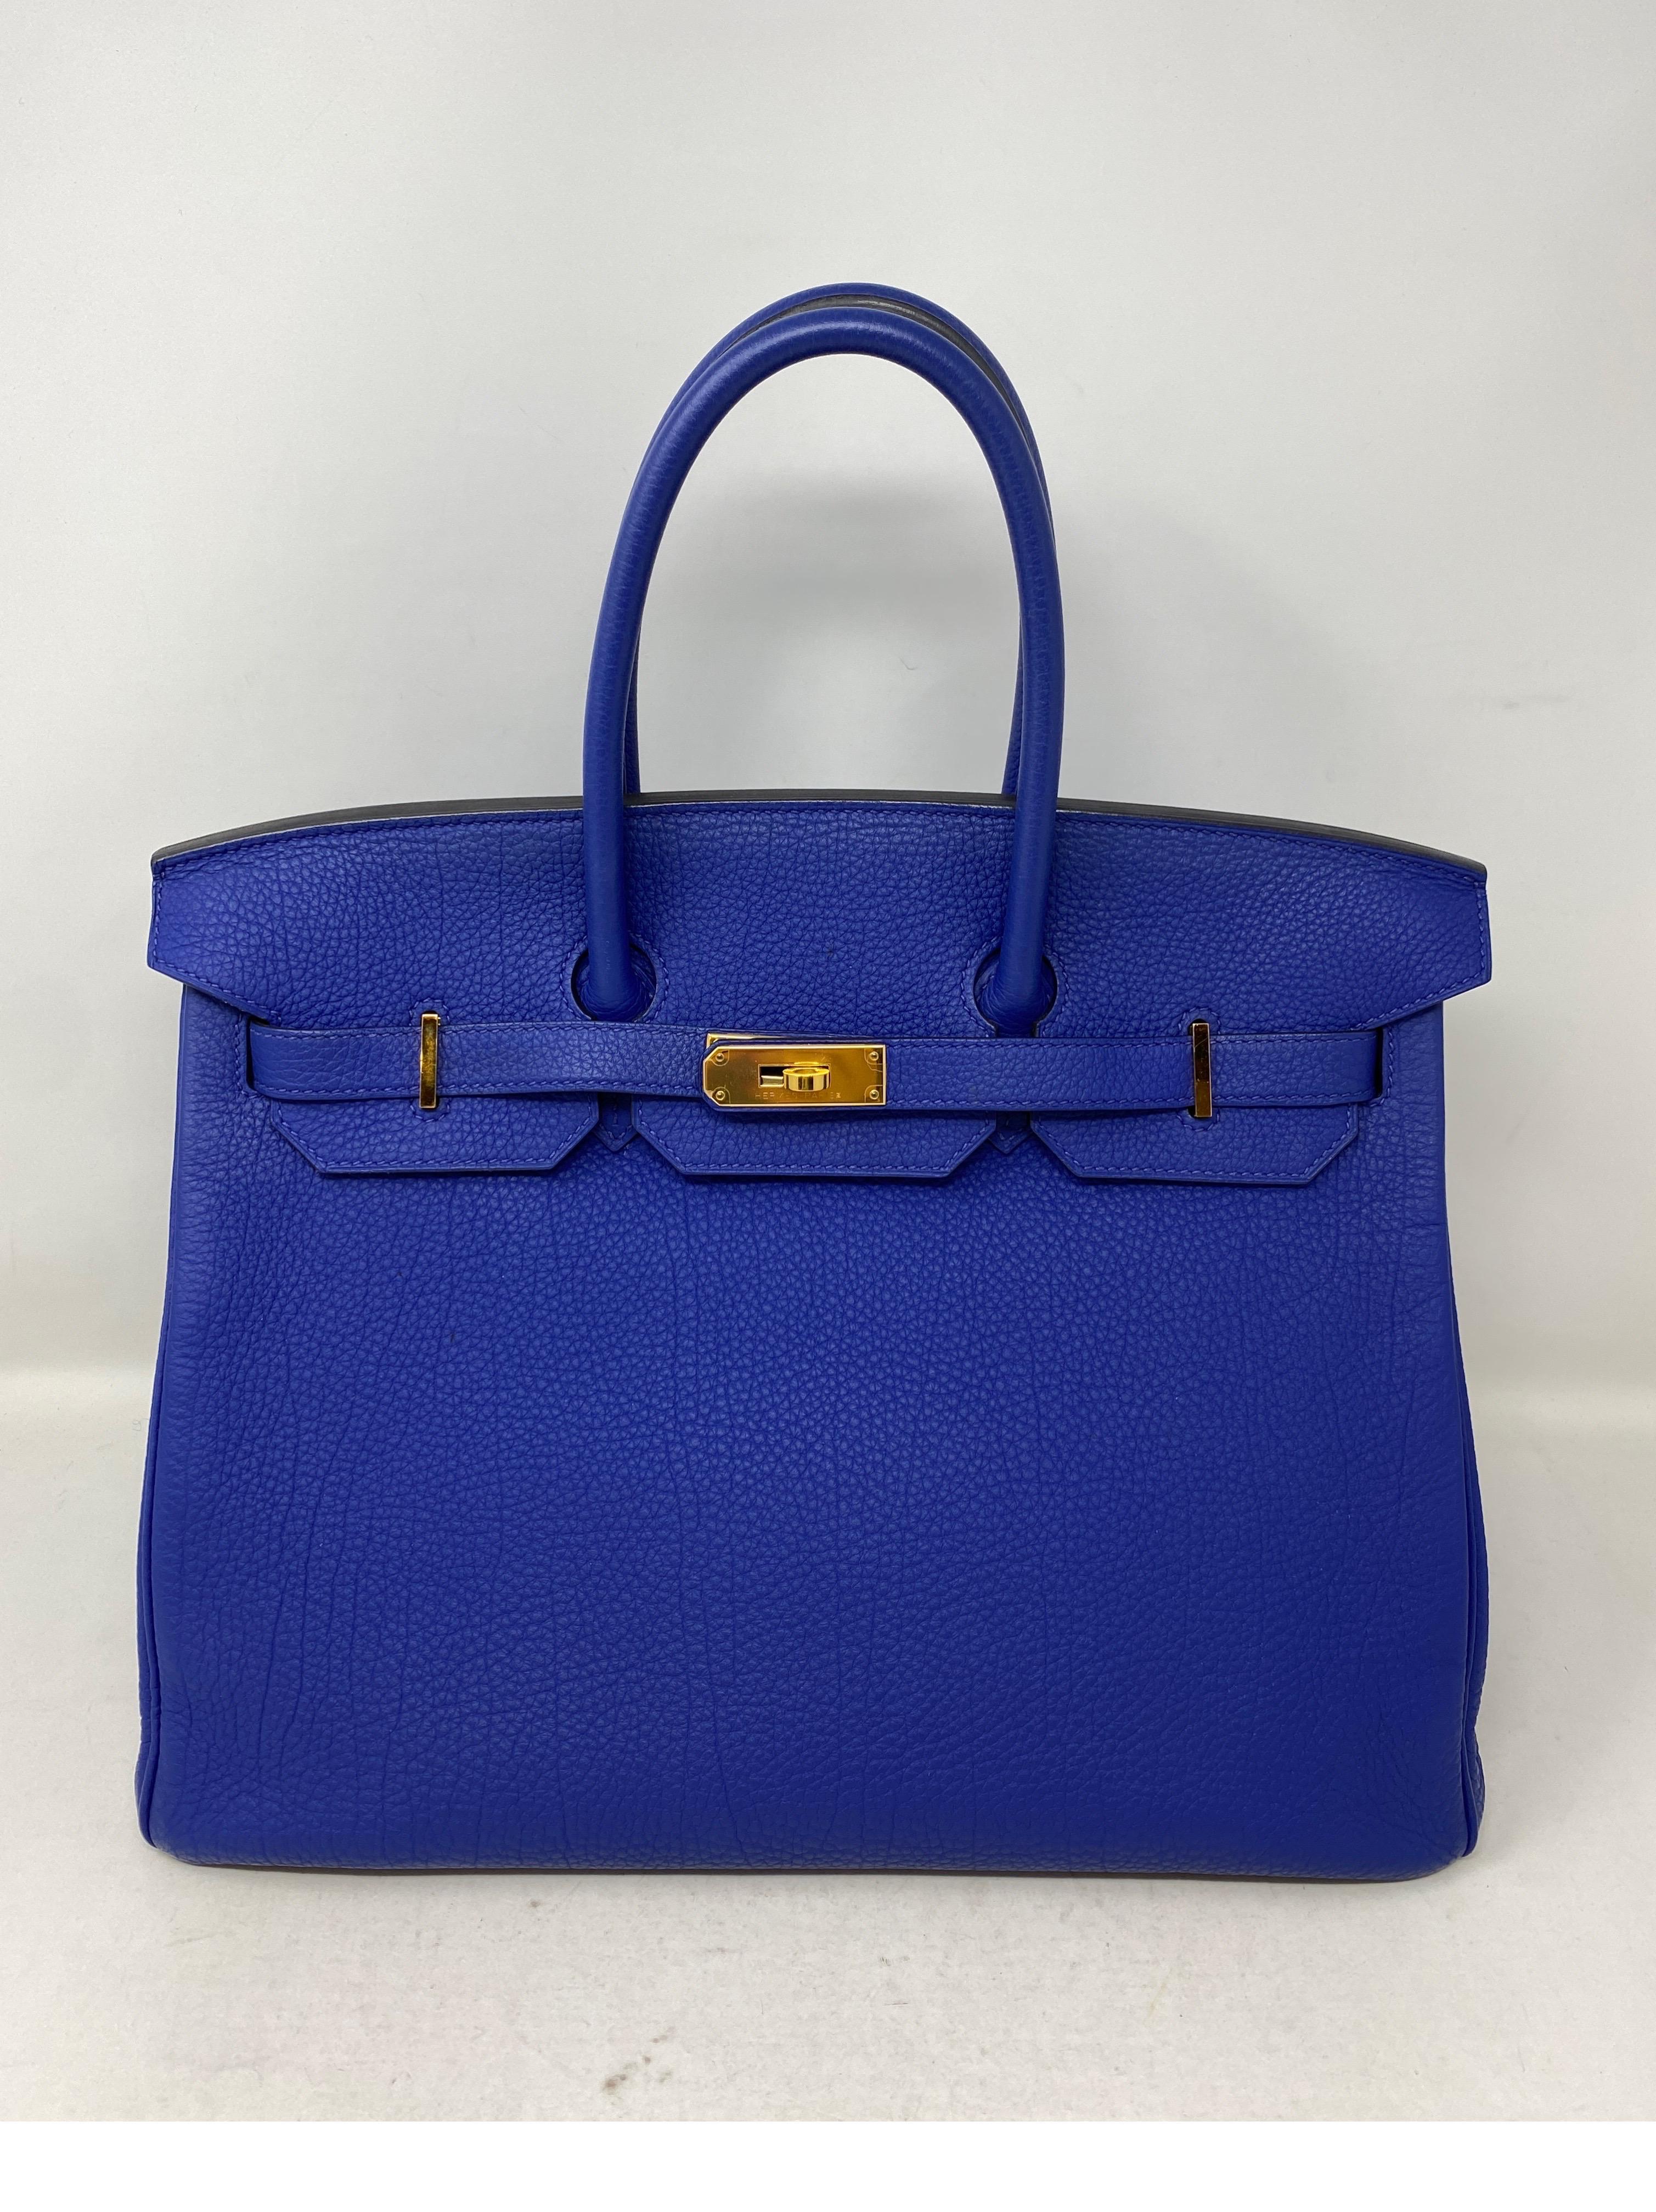 Hermes Blue Electrique Birkin 35 Bag. Stunning rare blue color with gold hardware. Togo leather. Looks new in mint condition. Collector's color. Includes clochette, lock, keys, and dust cover. Guaranteed authentic. 